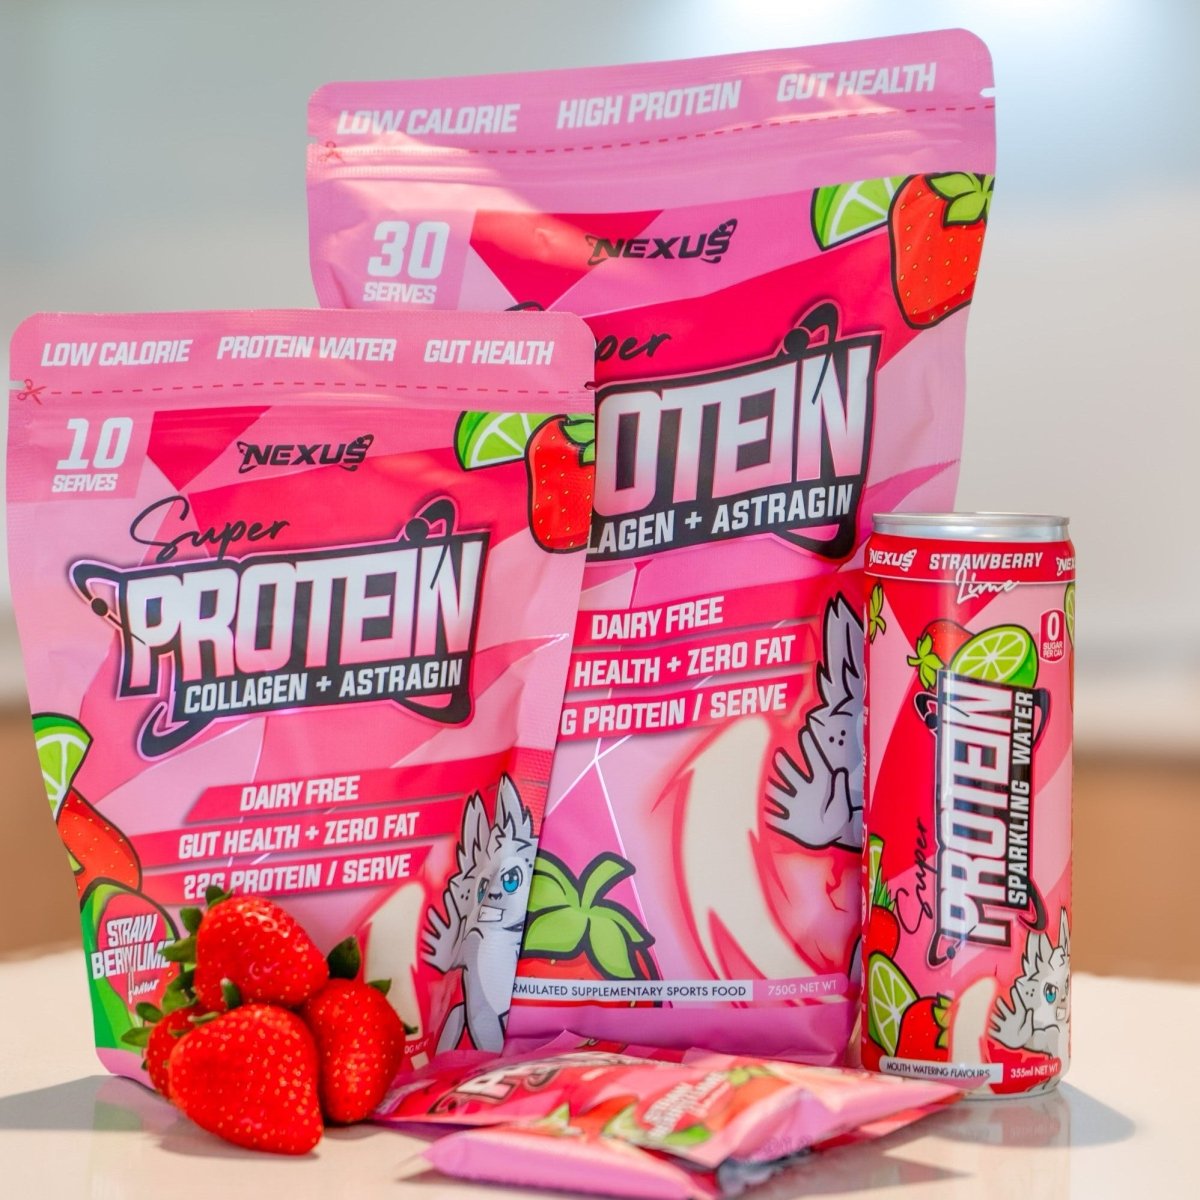 Super Protein Water: Strawberry Lime (10 Serves) - Nexus Sports Nutrition